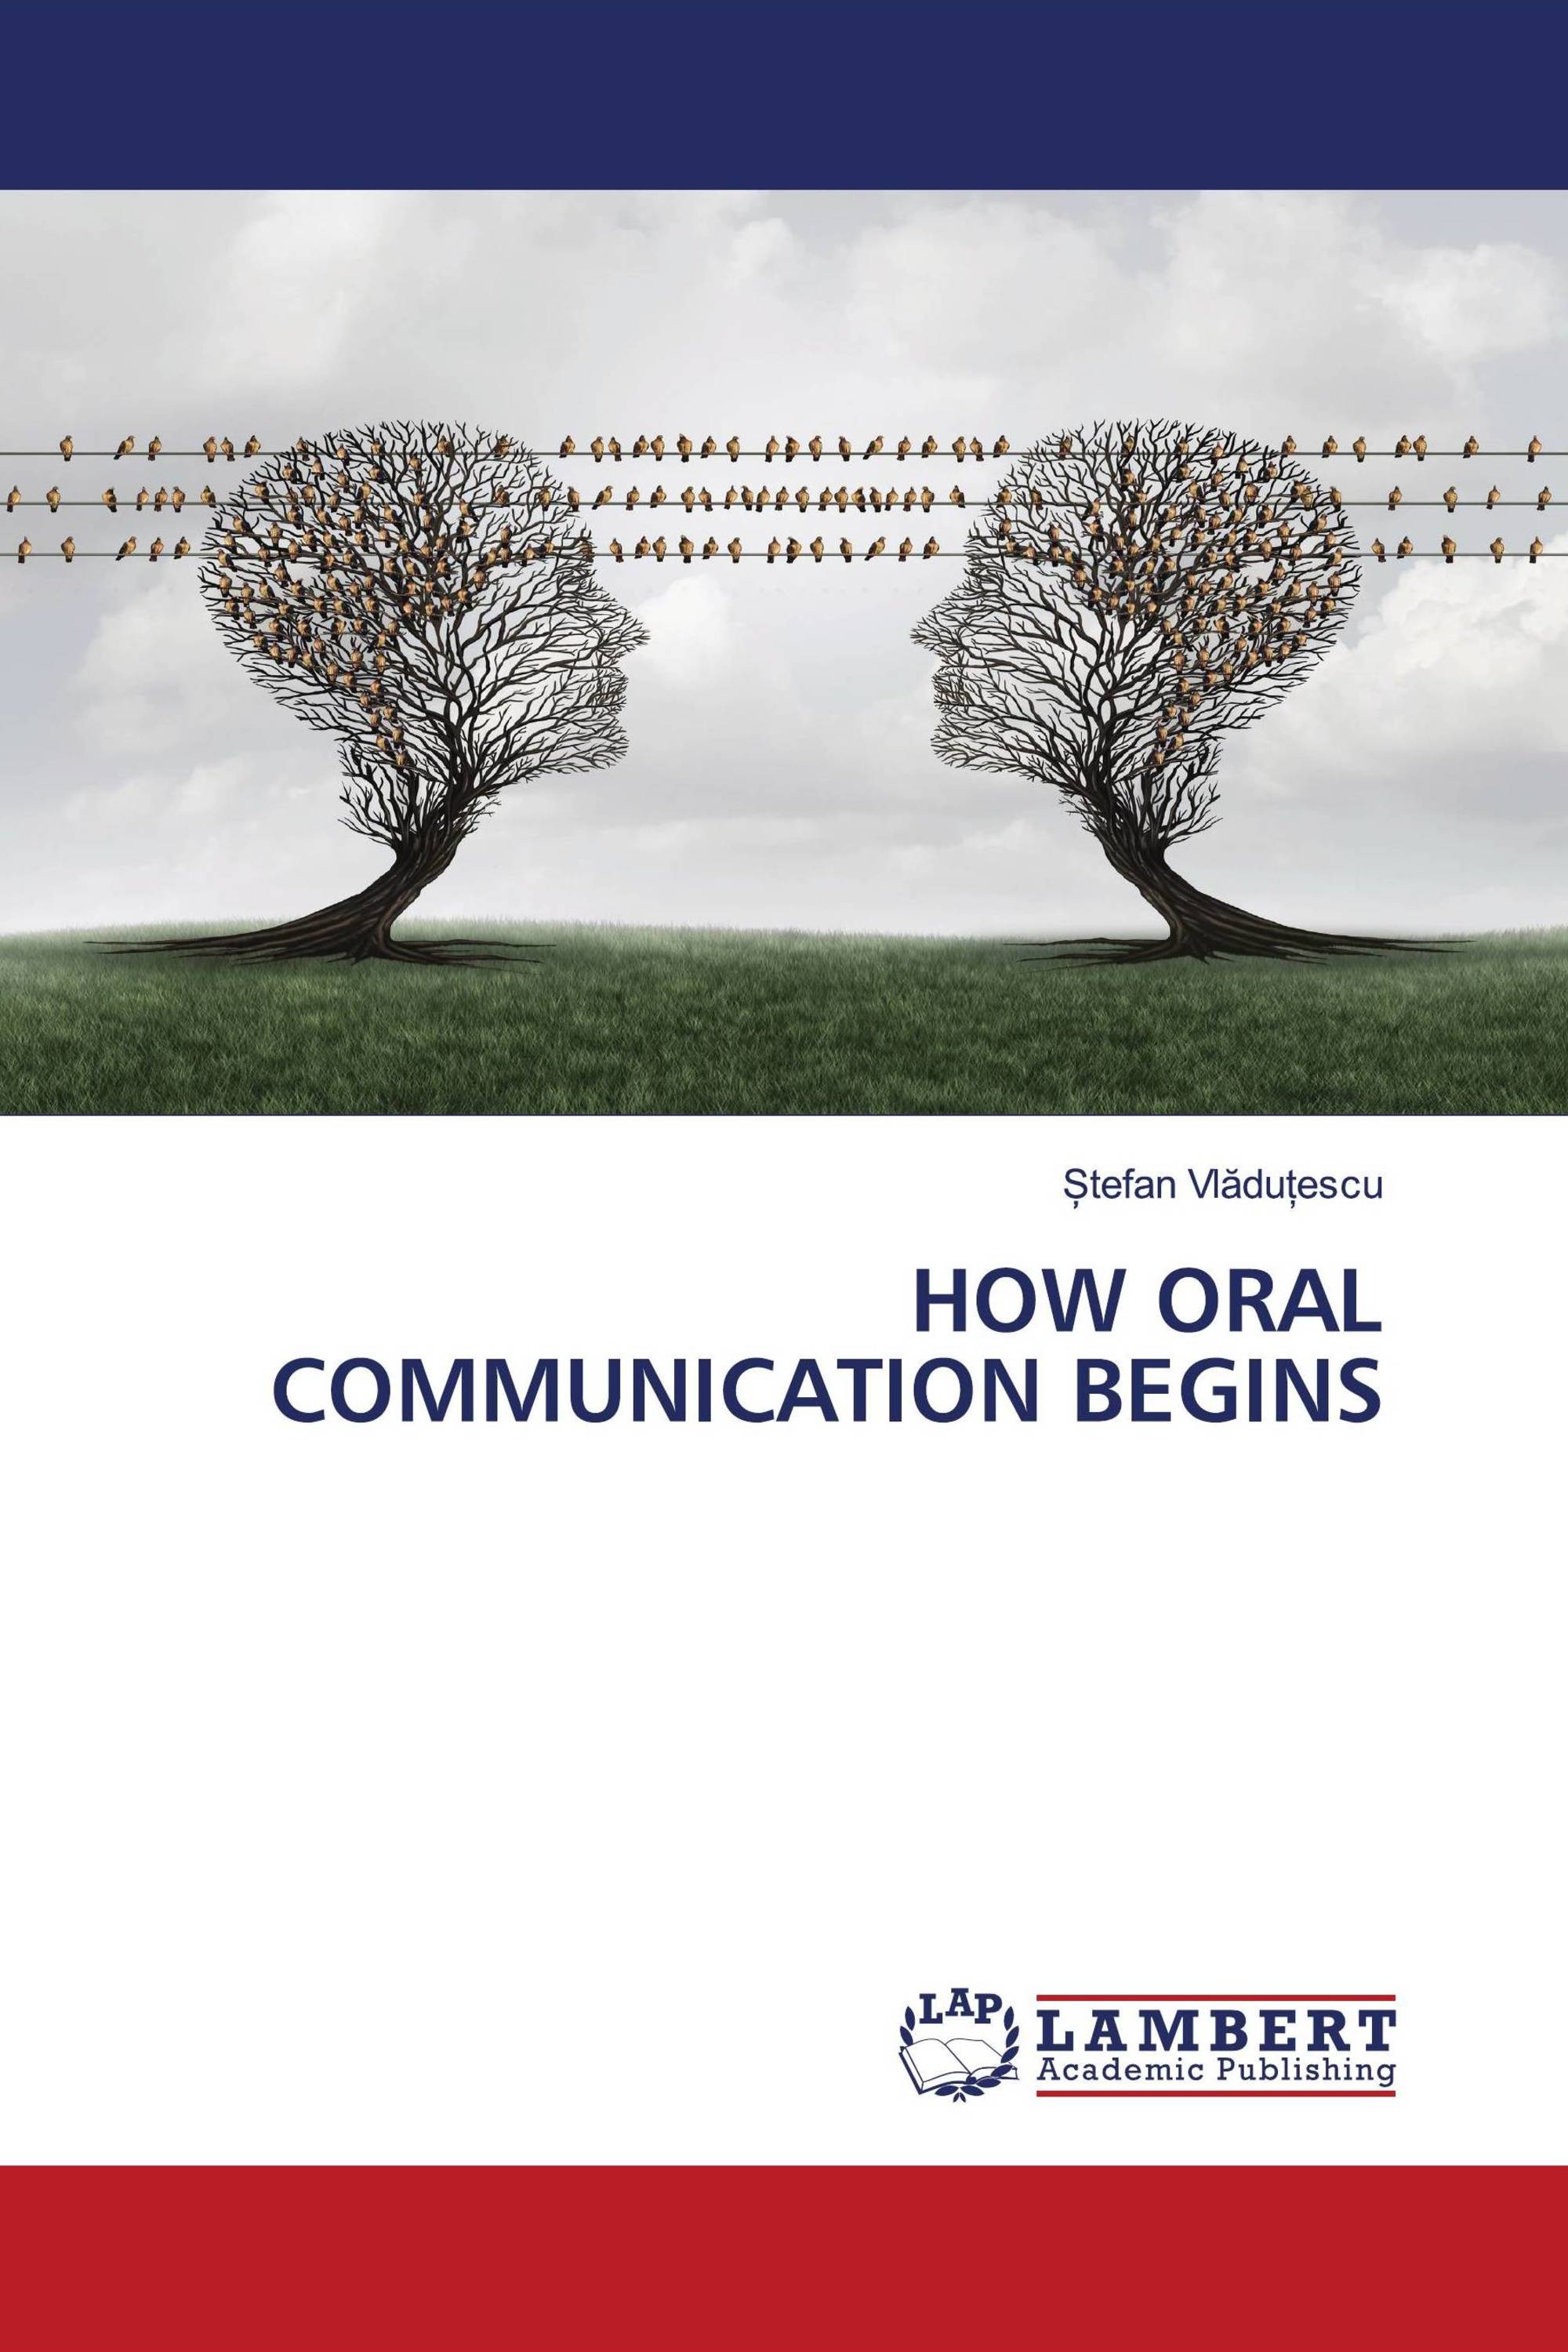 speech and oral communication for college students book pdf